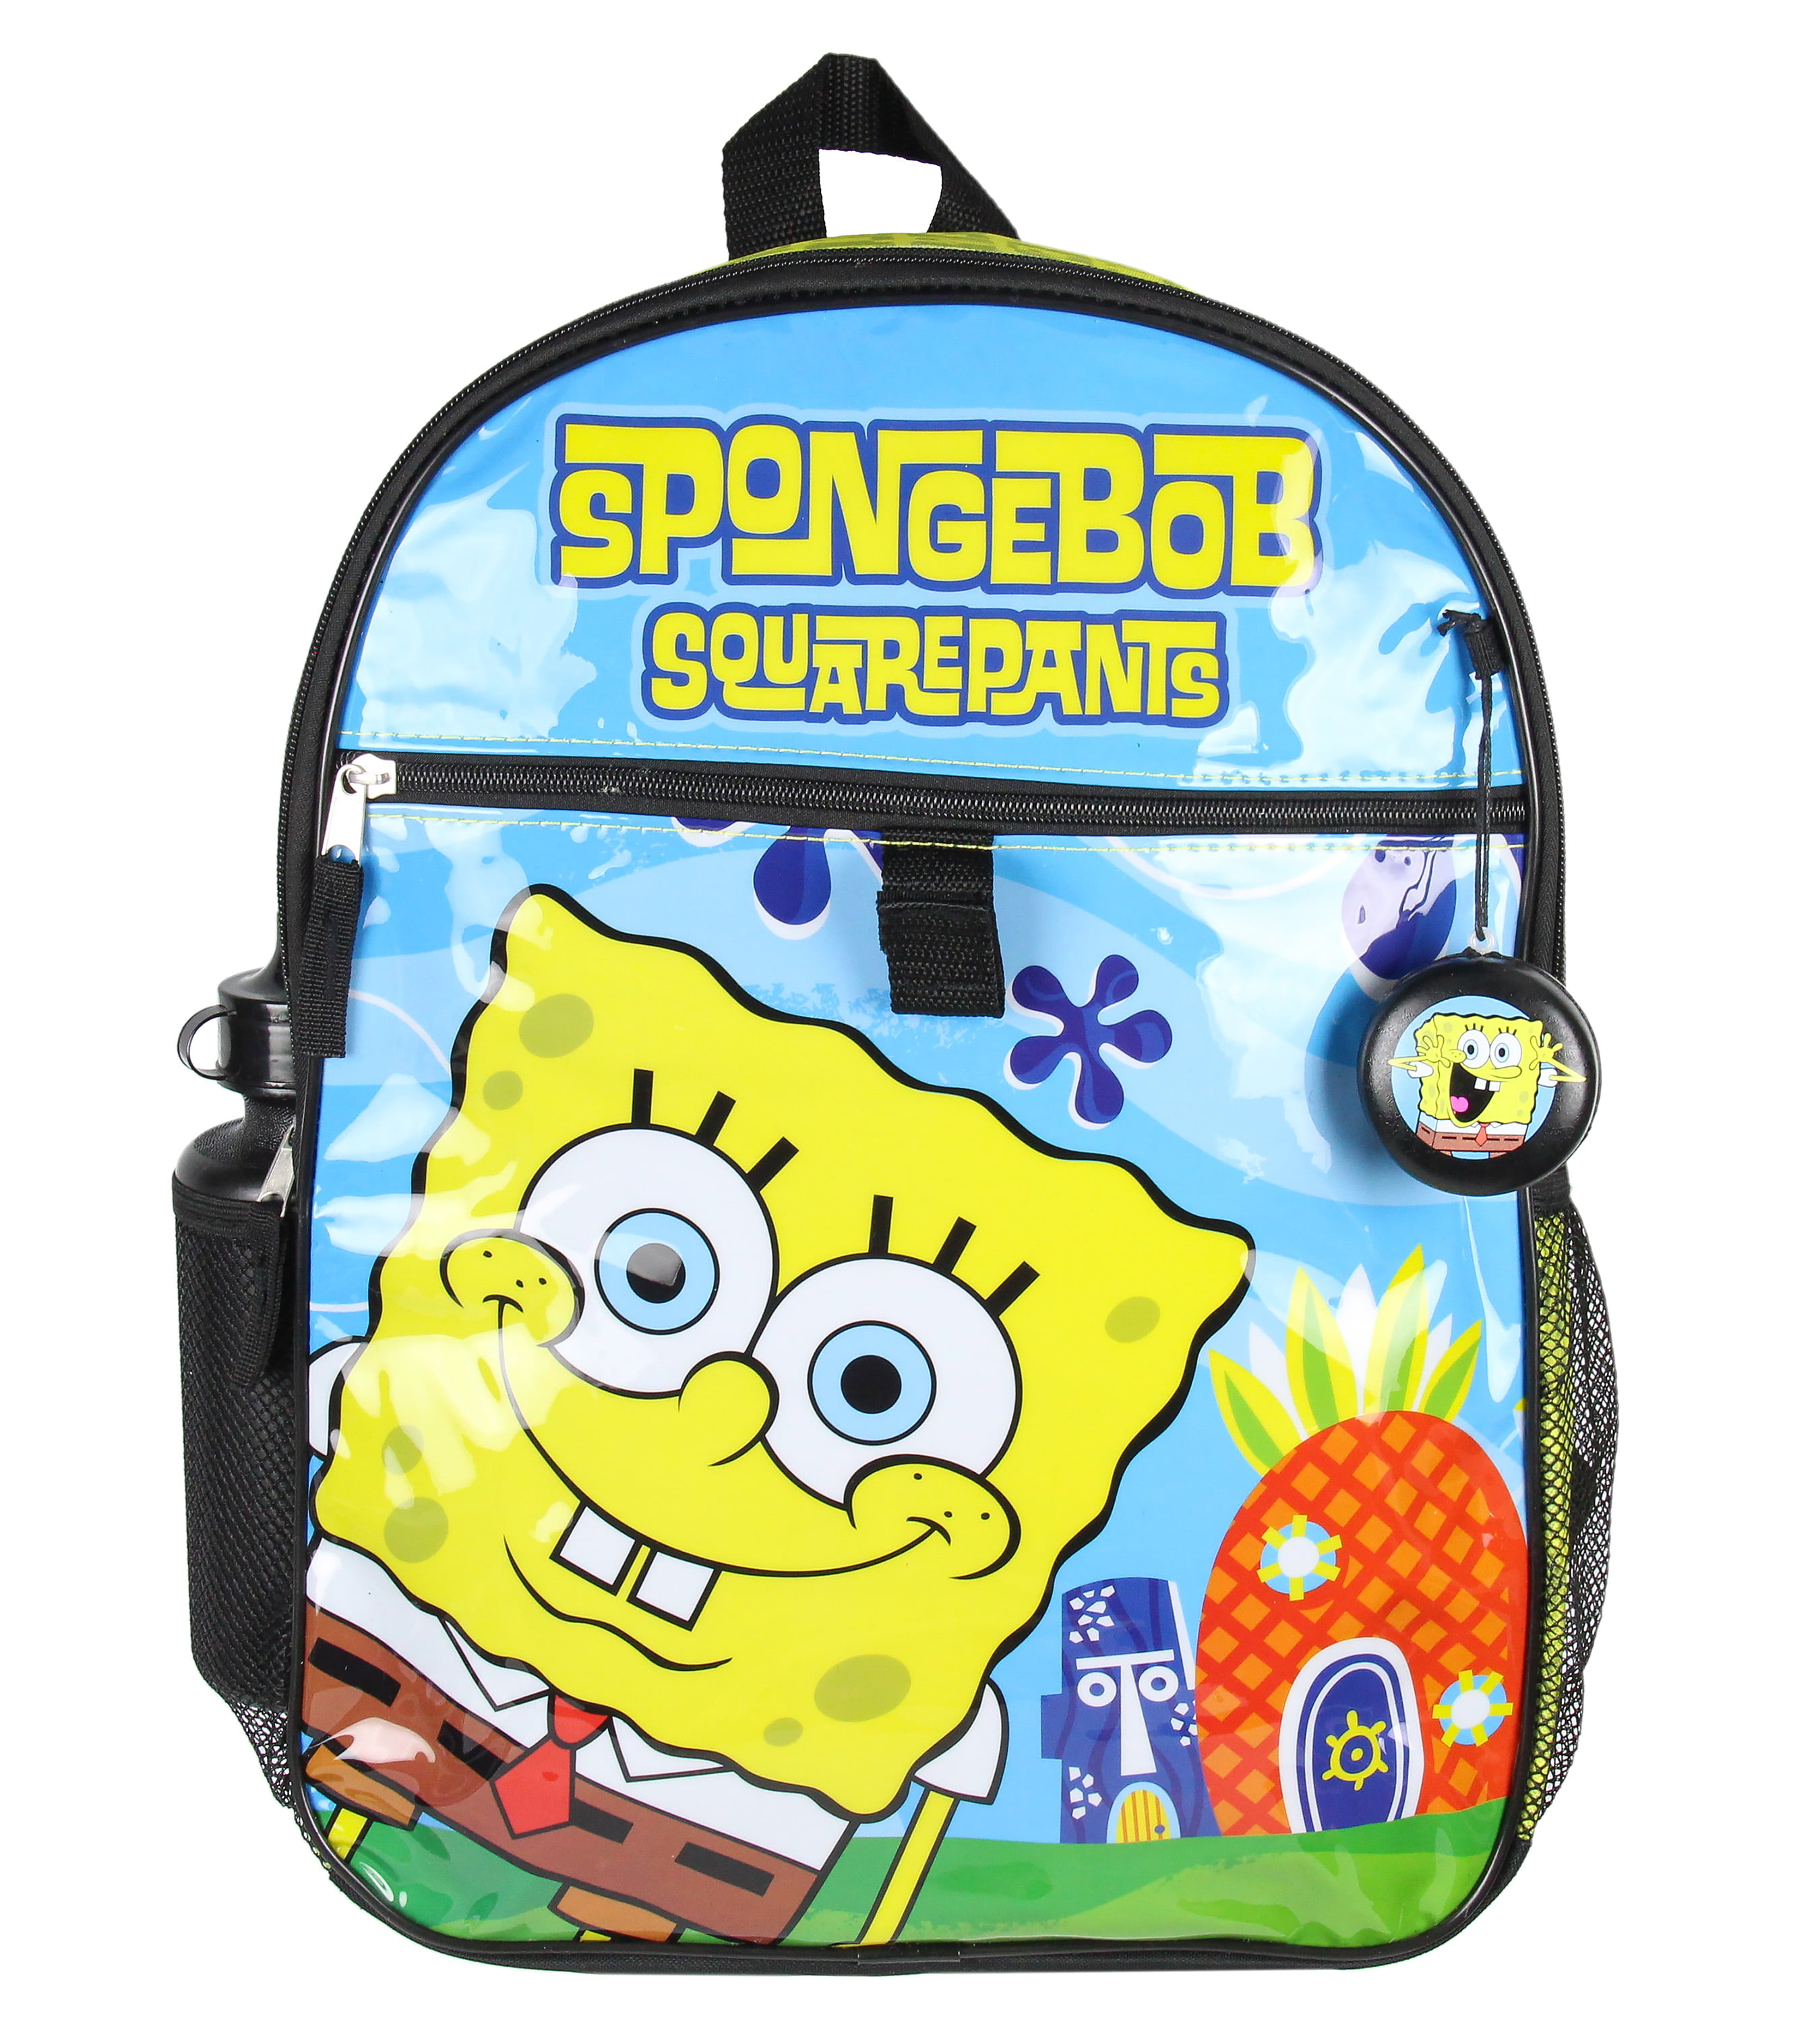 Spongebob Backpack with Lunch Box Set - Bundle with Spongebob SquarePants Backpack for Kids, Spongebob Lunch Box, Stickers, Stationery, Water Bottle